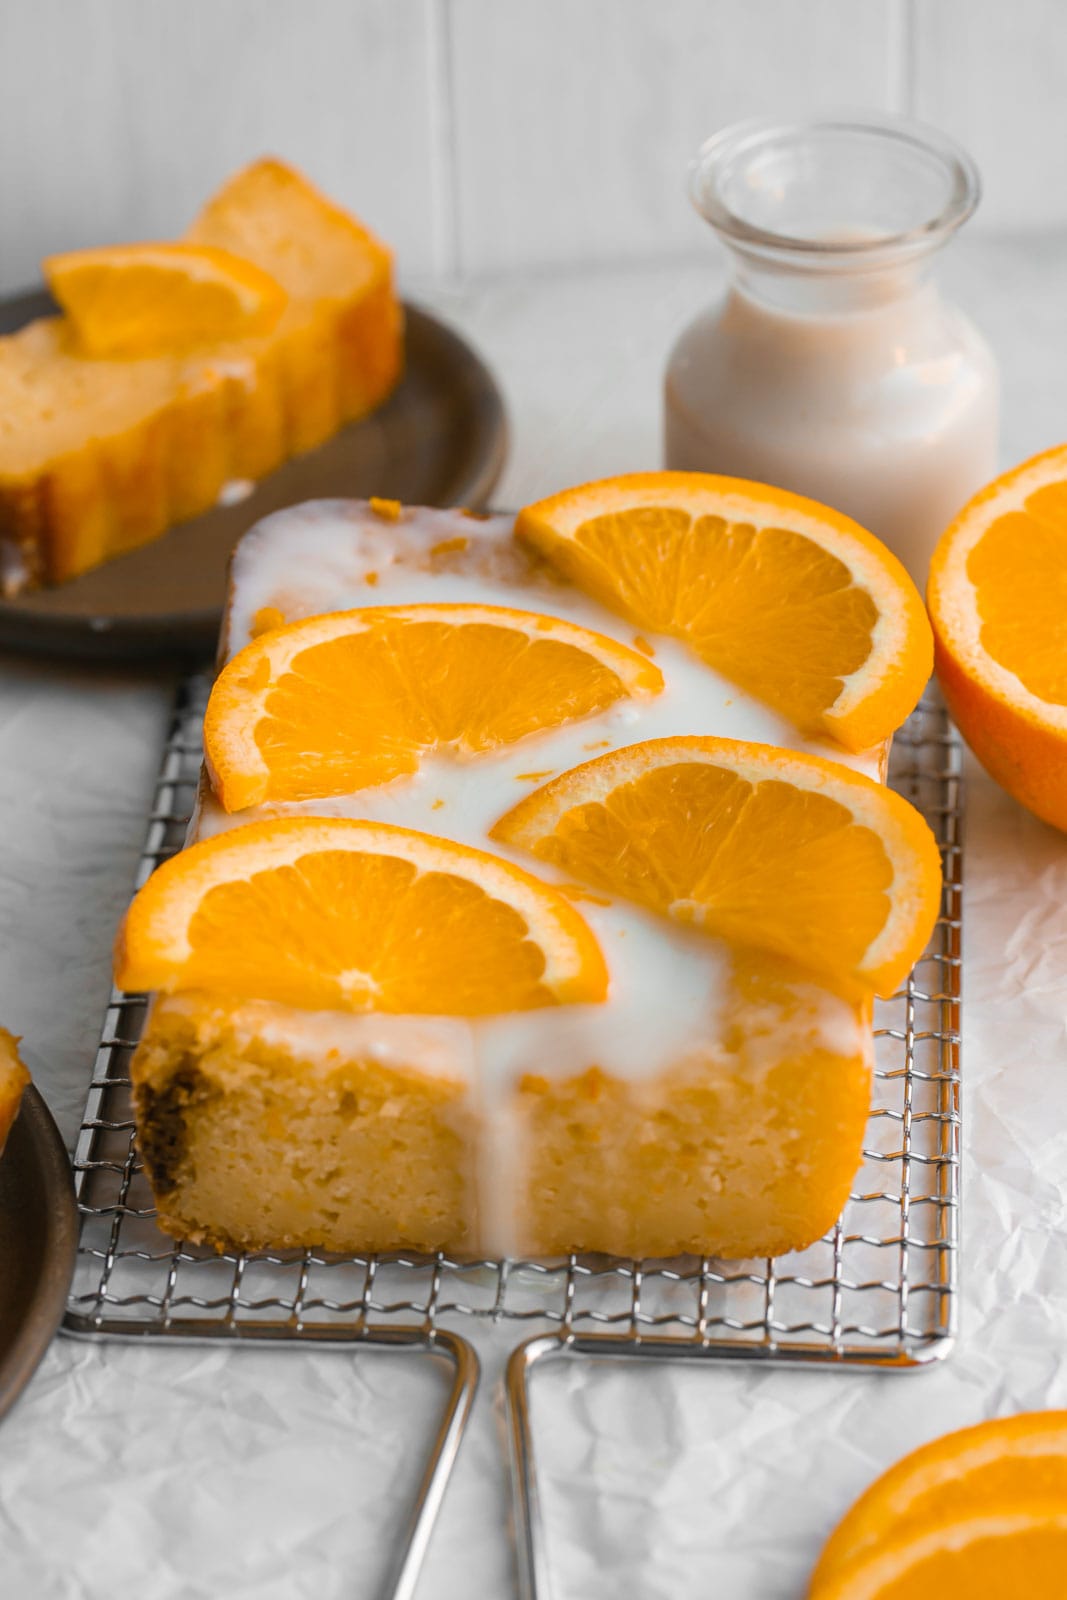 Orange loaf cake with icing dripping down.